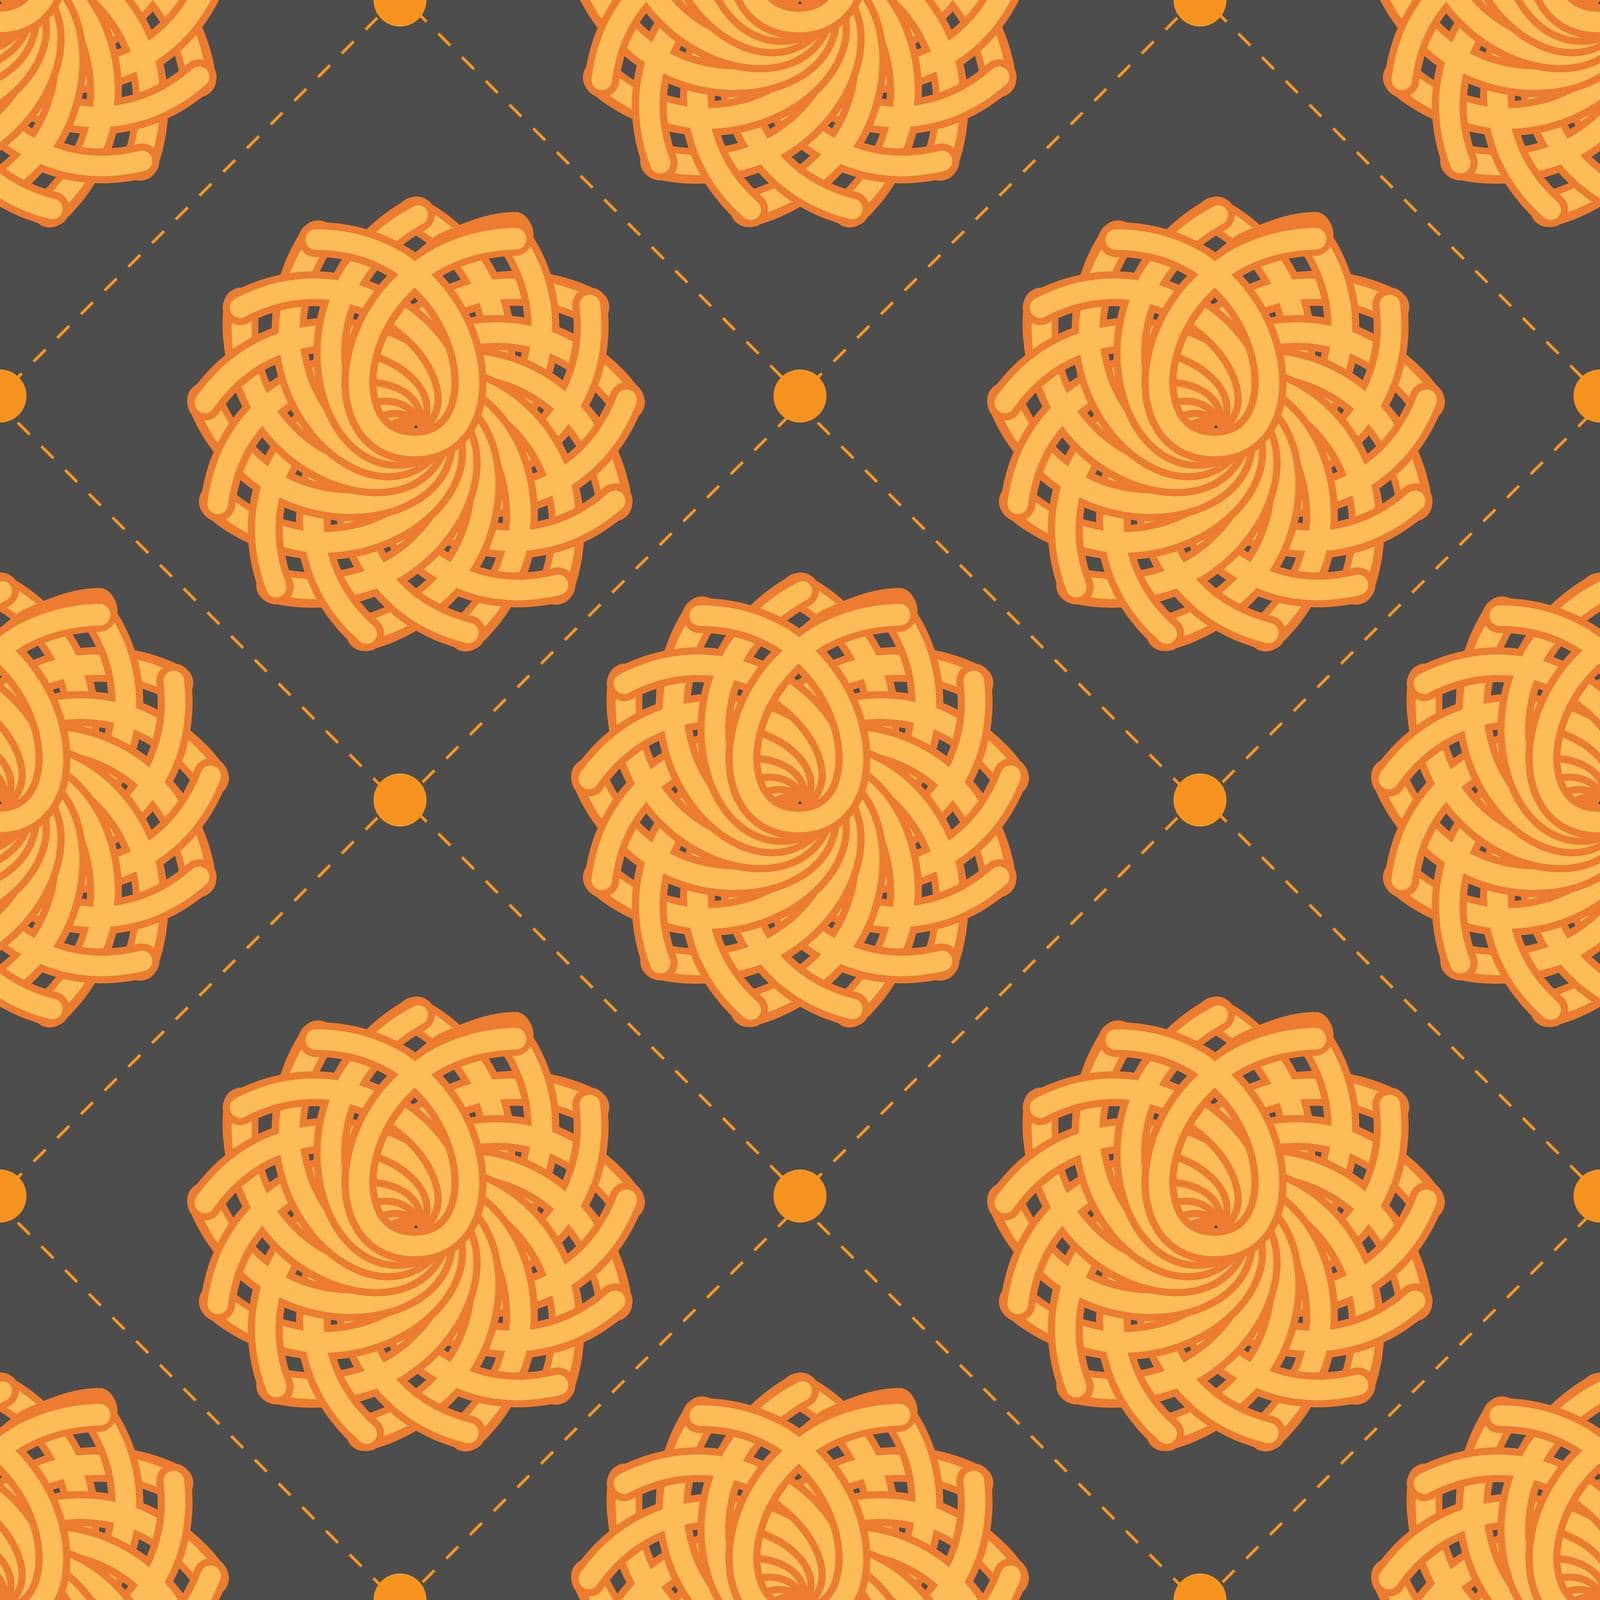 Ornament pattern vector tile by stocklady